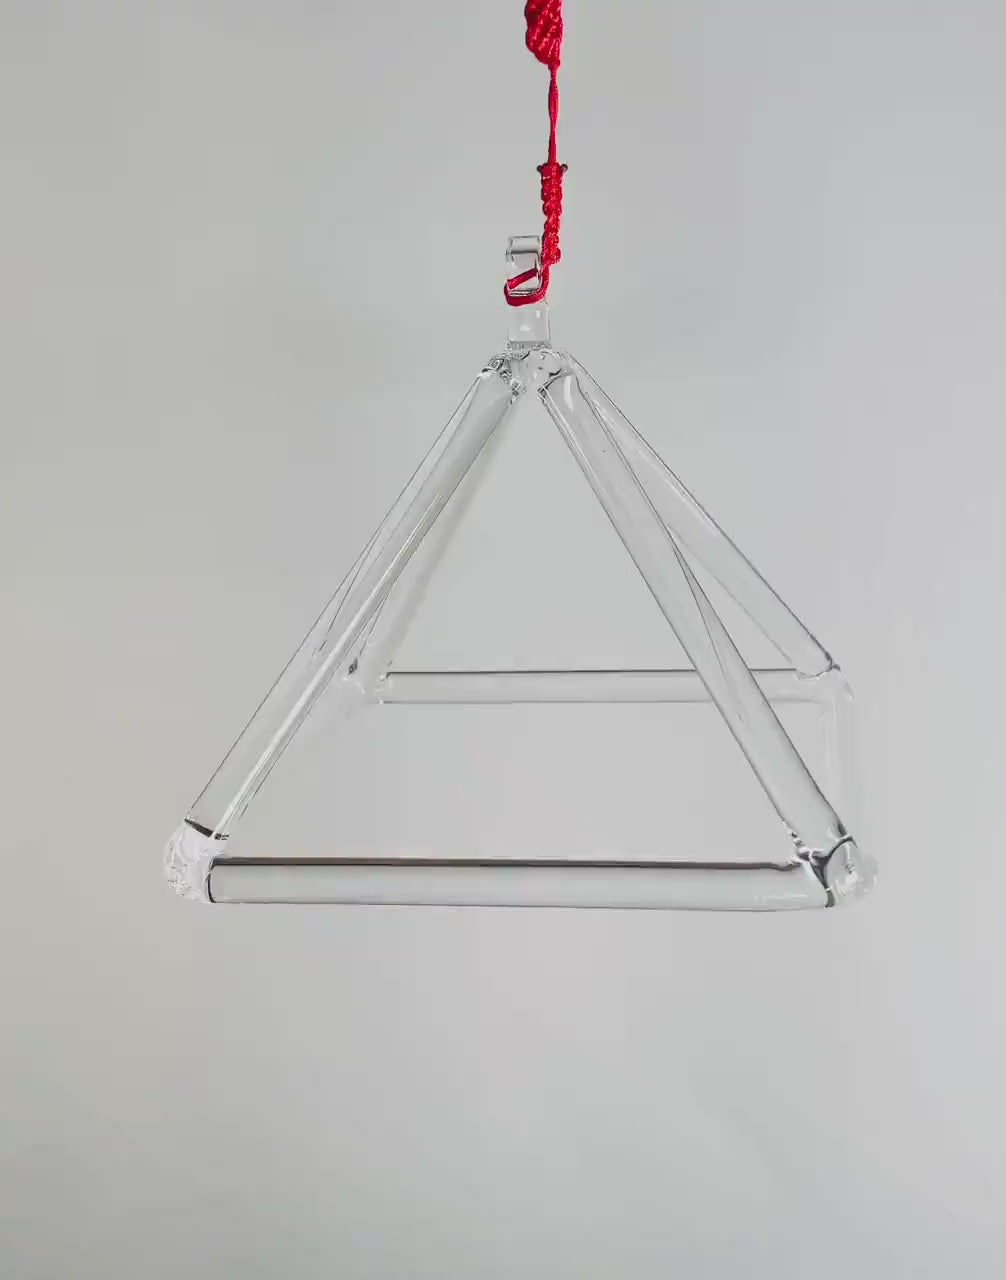 6” Clear Quartz Crystal Singing Pyramid Sound Healing Musical Instrument With Crystal Striker And Padded Carry Case